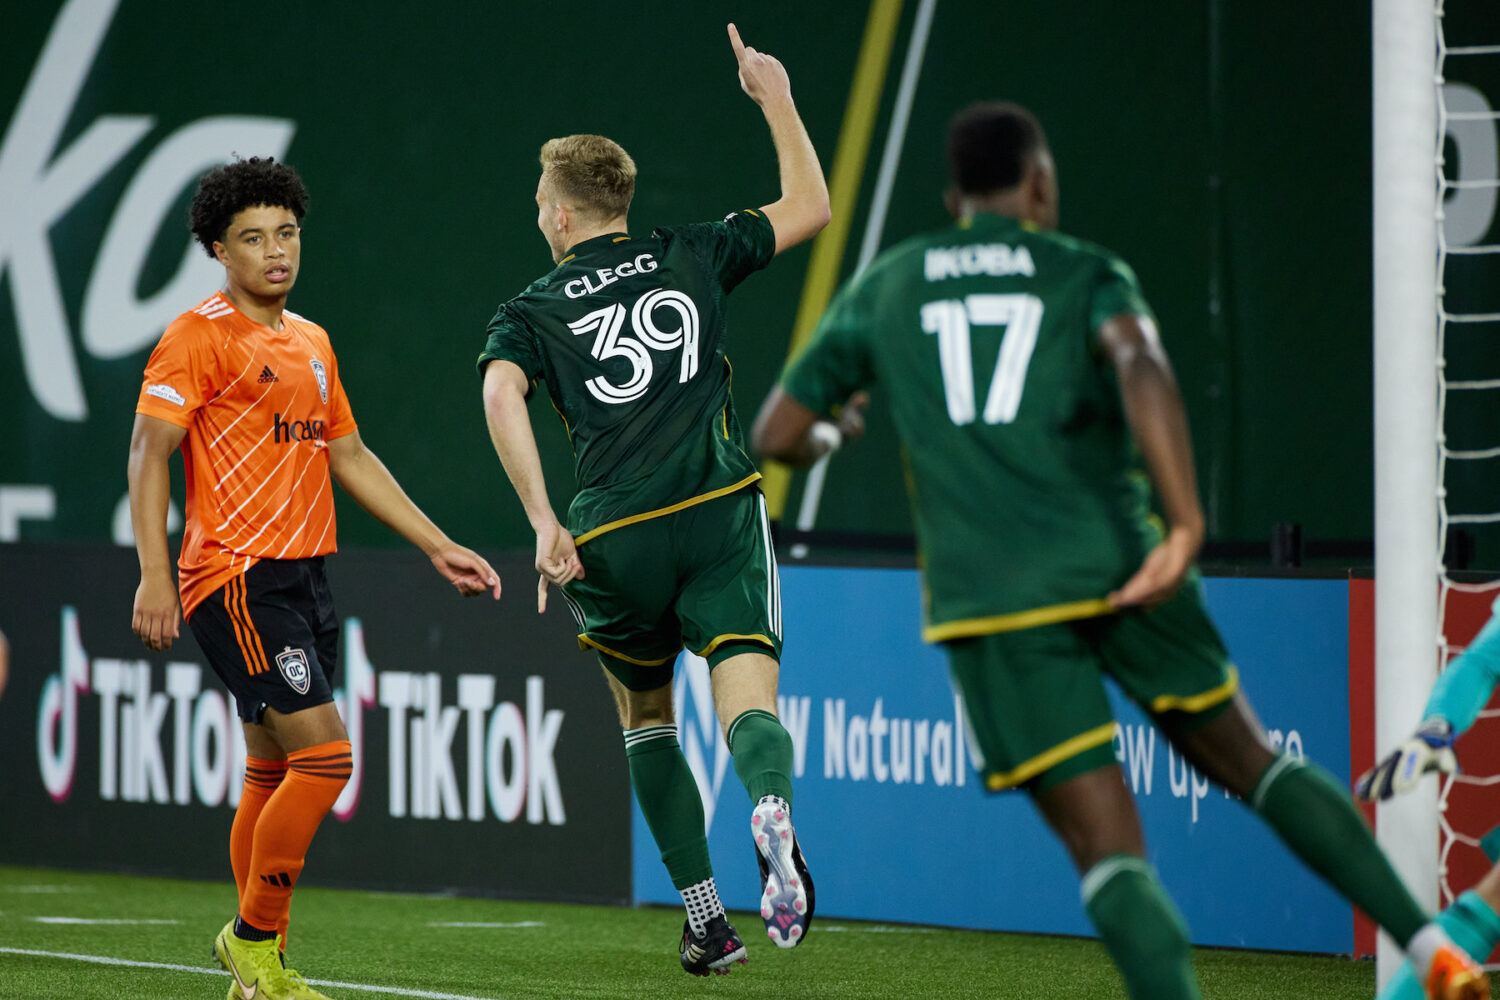 April 26 2023; Portland, OR, USA; Timbers vs Orange County SC in the US Open Cup at Providence Park. Photo: Craig Mitchelldyer- Portland Timbers